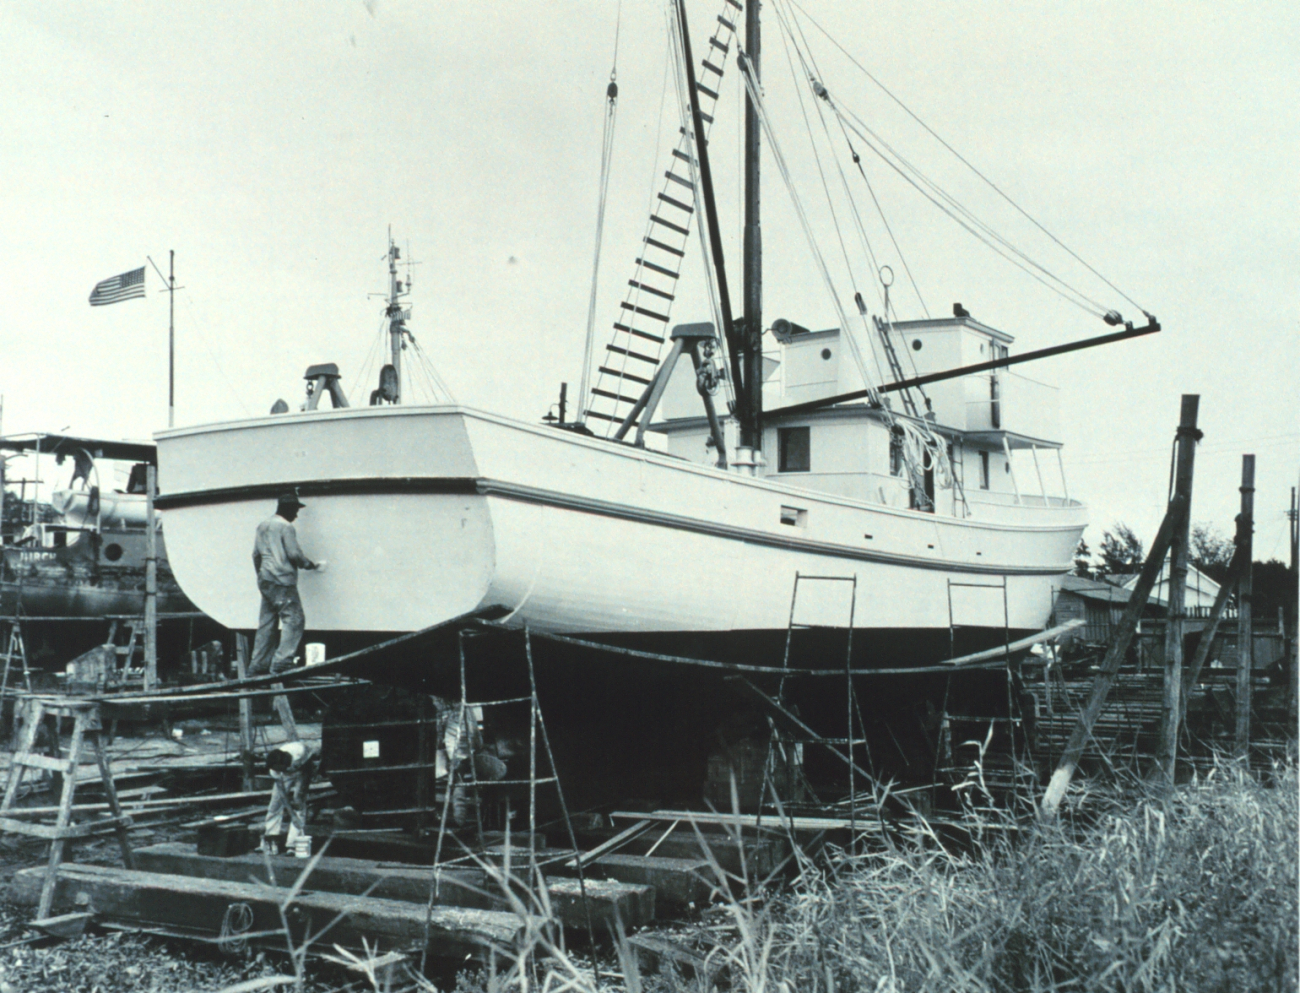 The Bureau of Commercial Fisheries Research Vessel GEORGE M